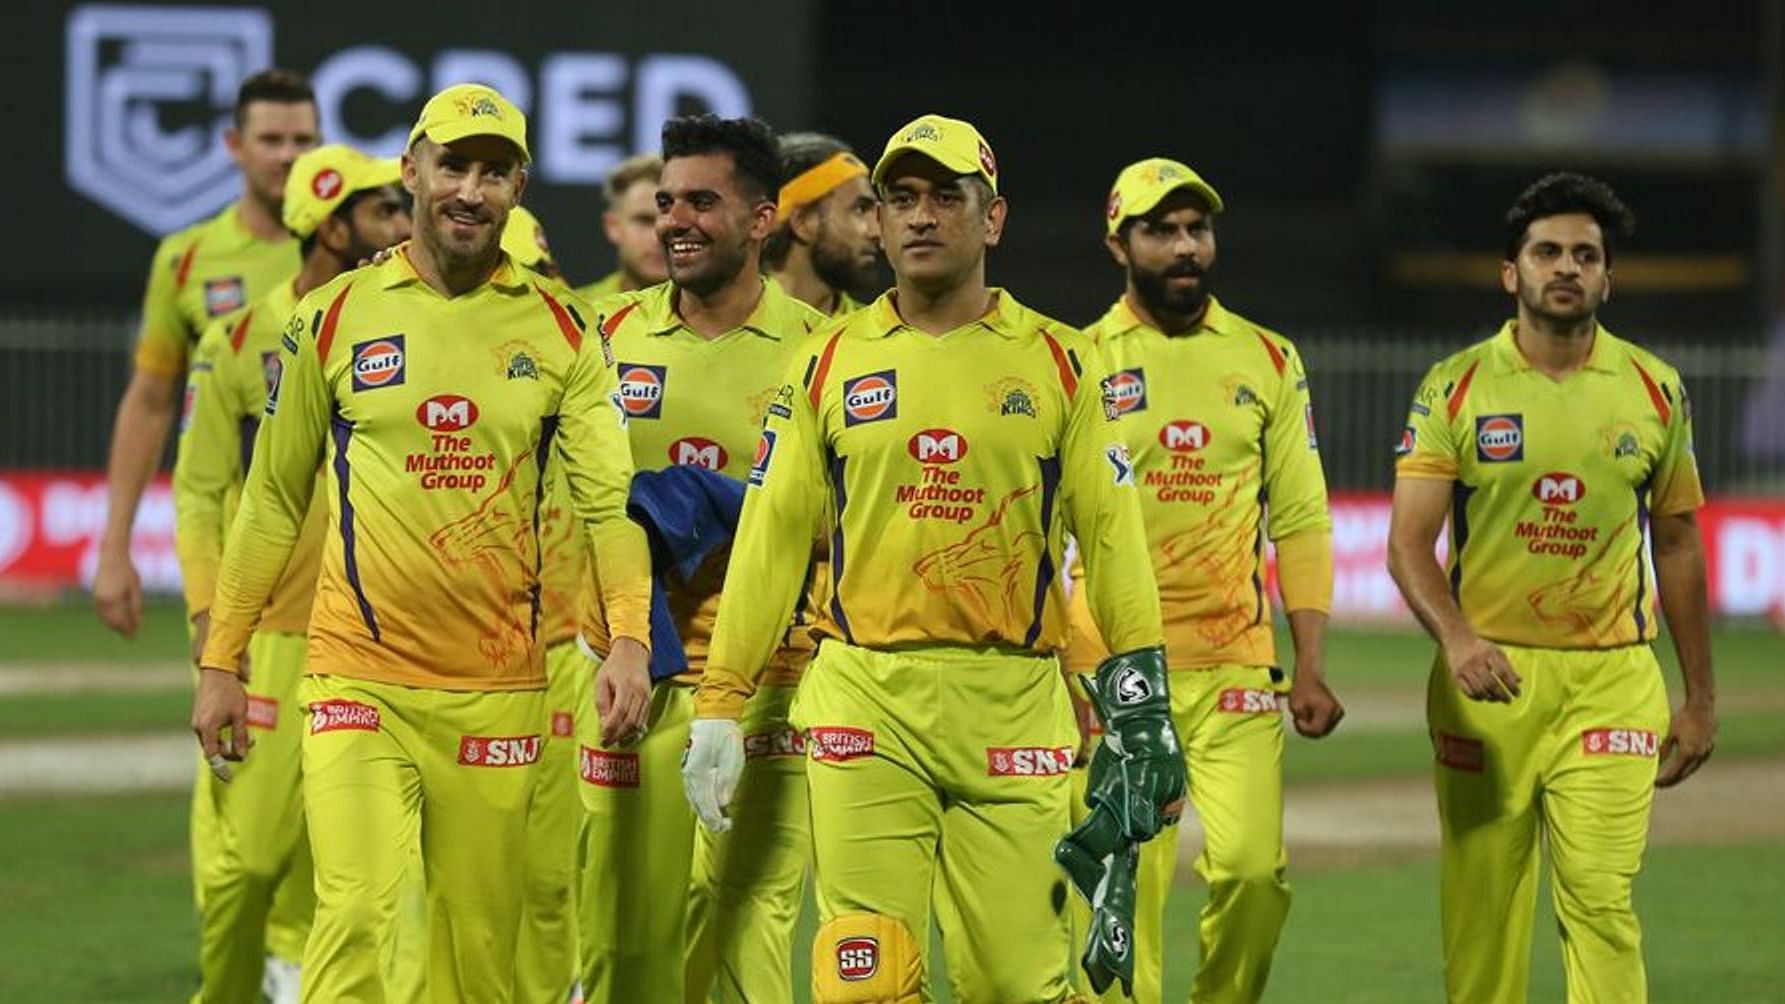 Chennai Super Kings after losing 8 matches in this IPL season are all but out of the playoffs race.